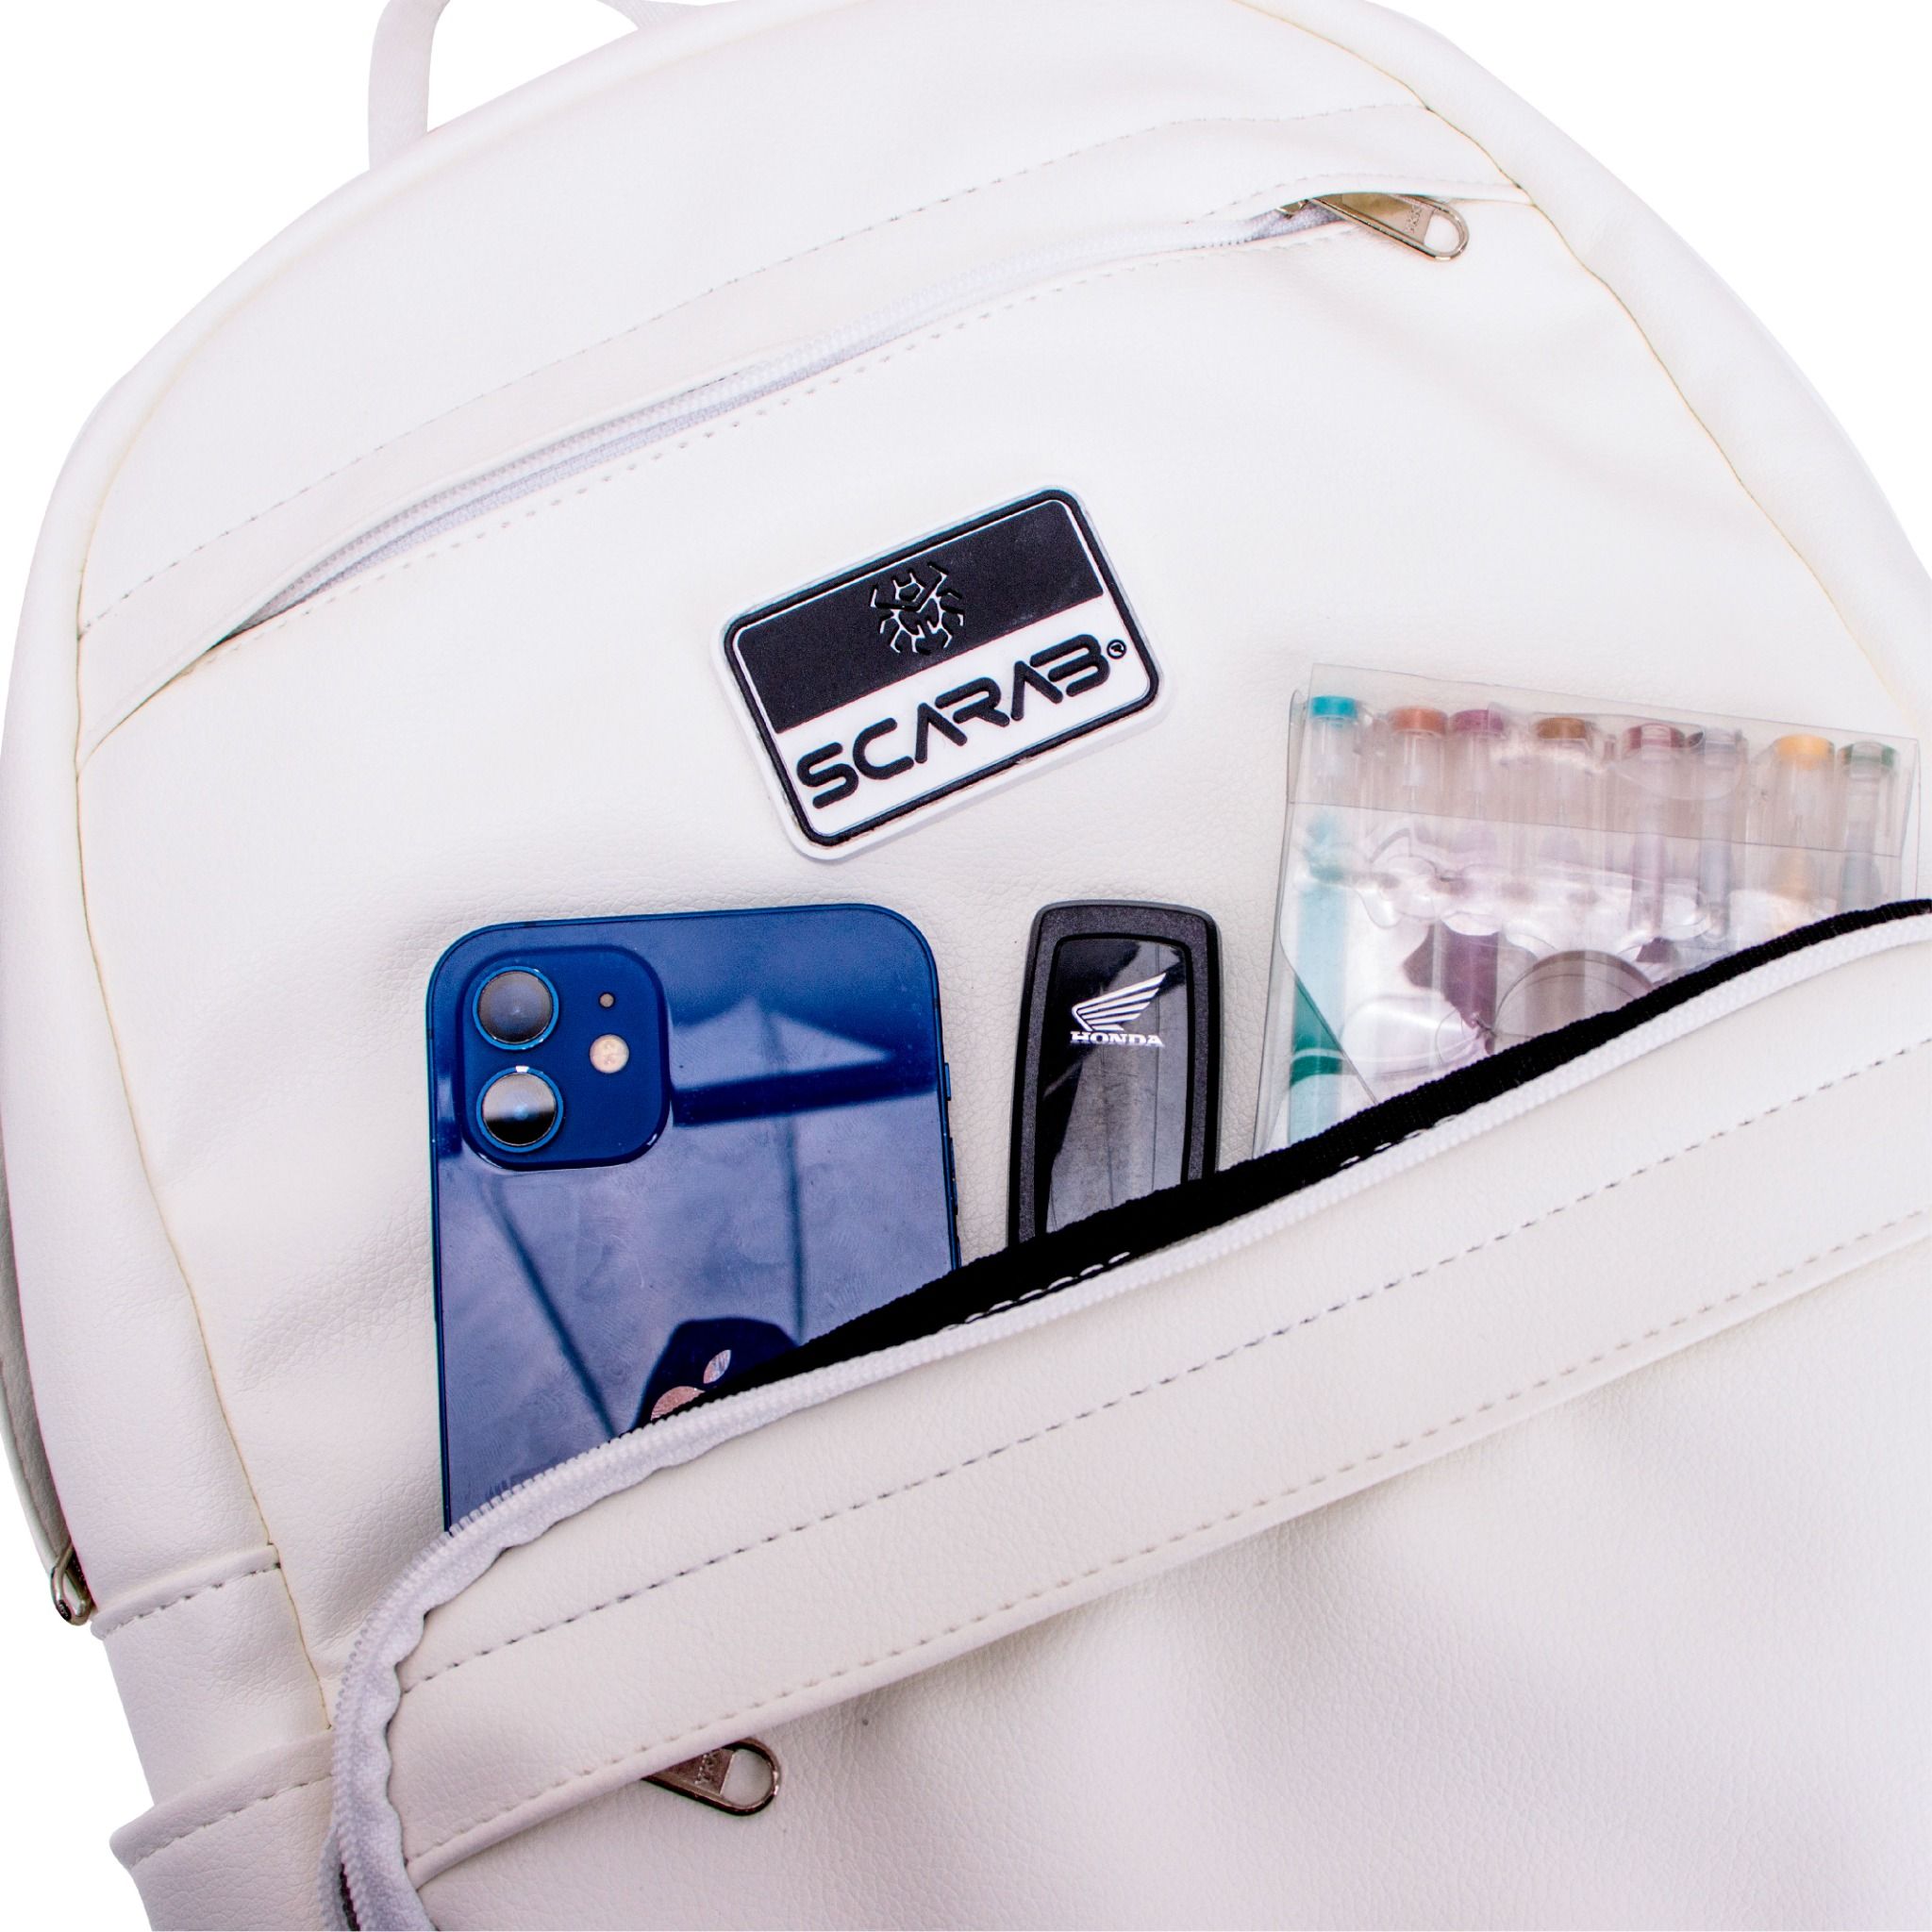  Multi Leather Backpack - White 